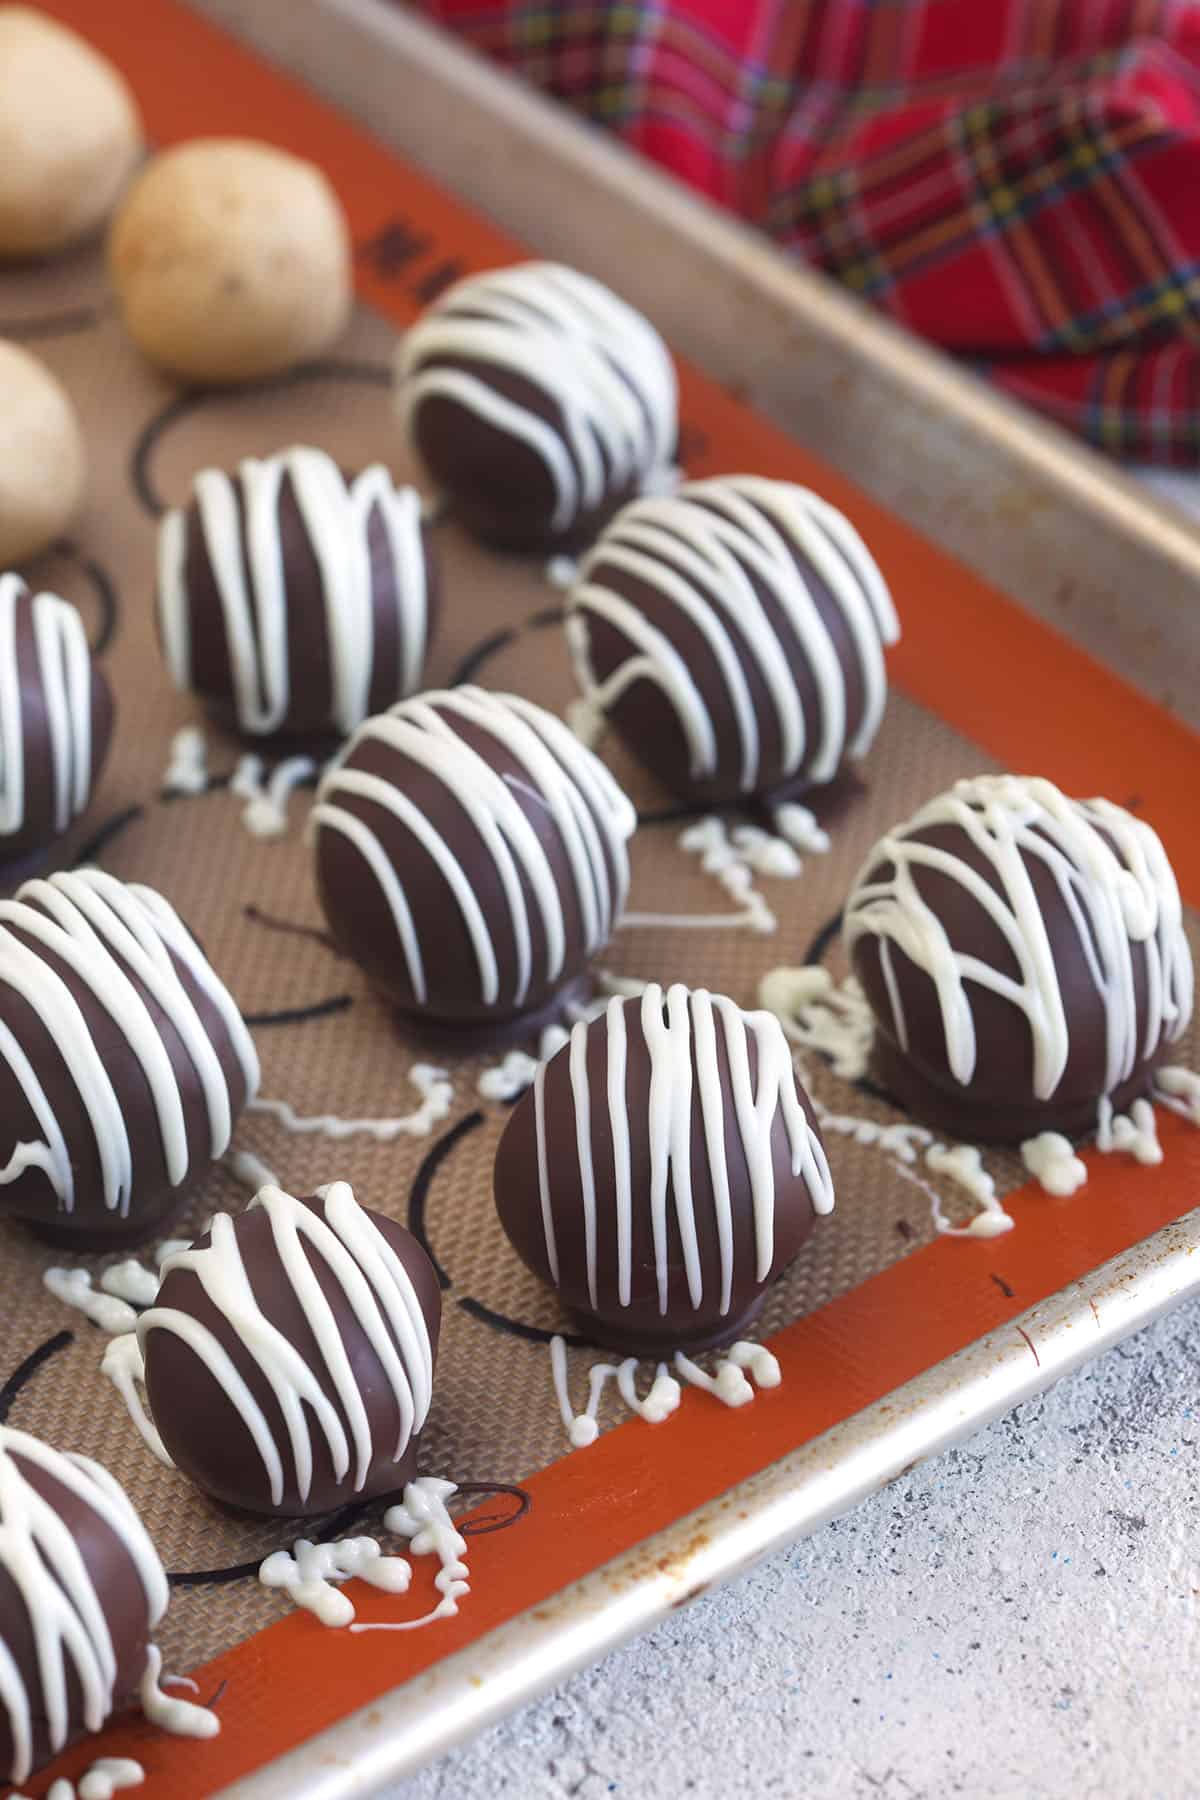 Peanut butter balls are placed on a baking sheet.